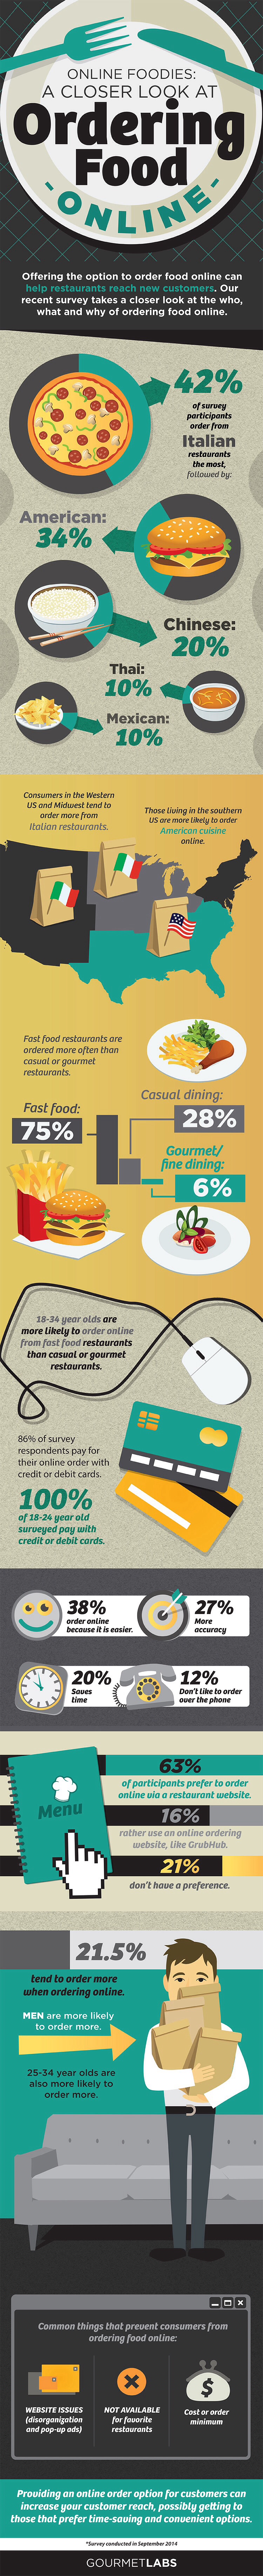 Ordering food online - infographic by Gourmet Labs